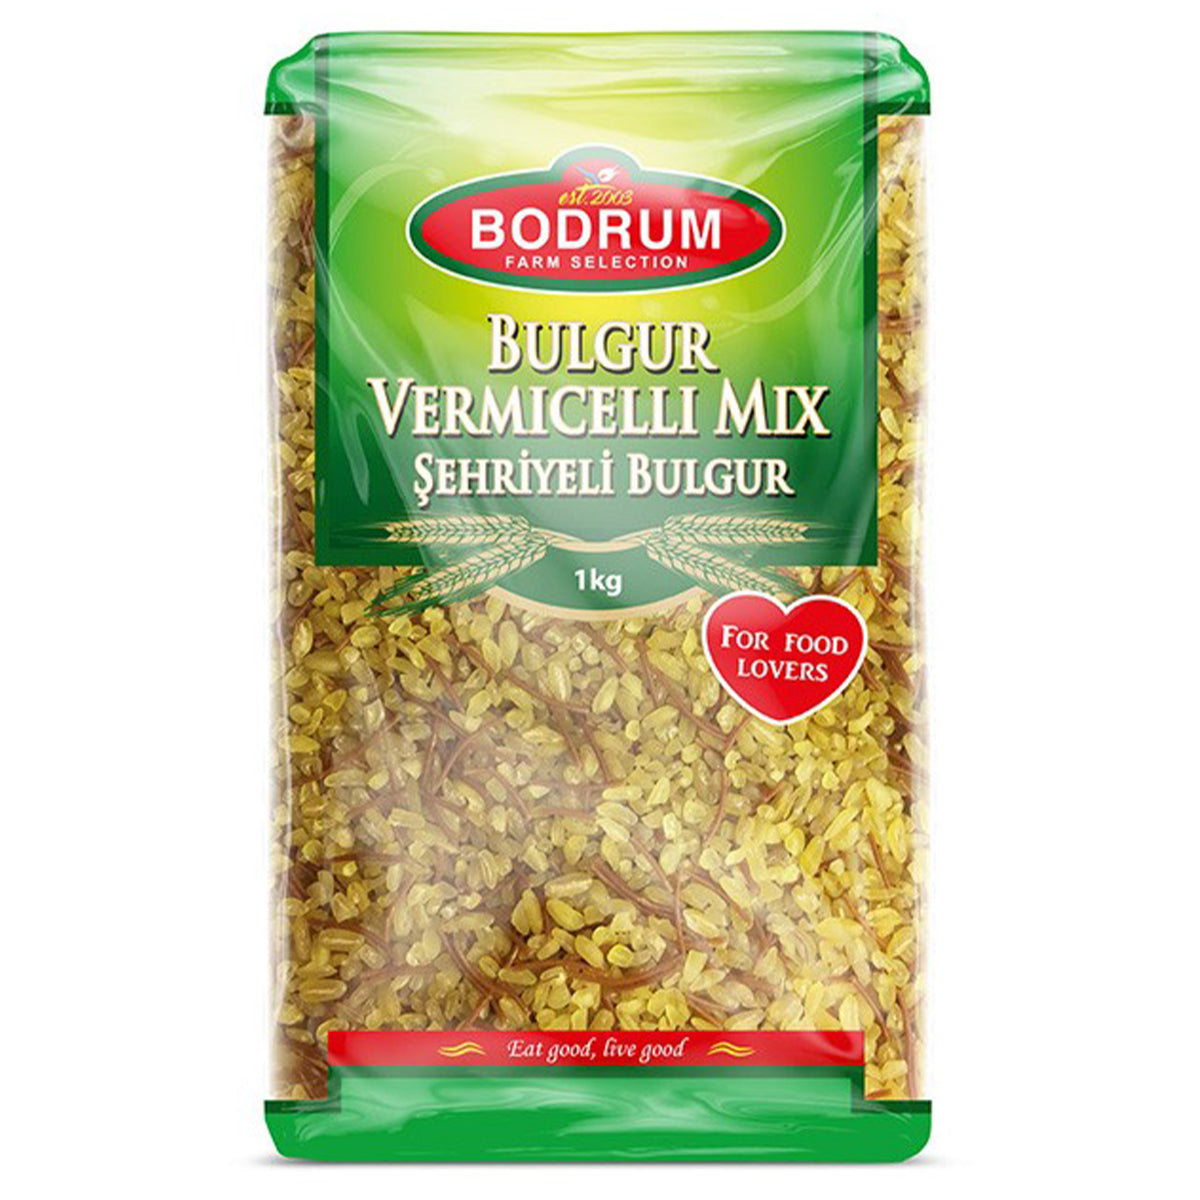 Bodrum - Coarse Bulgur with Vermicelli - 1kg - Continental Food Store